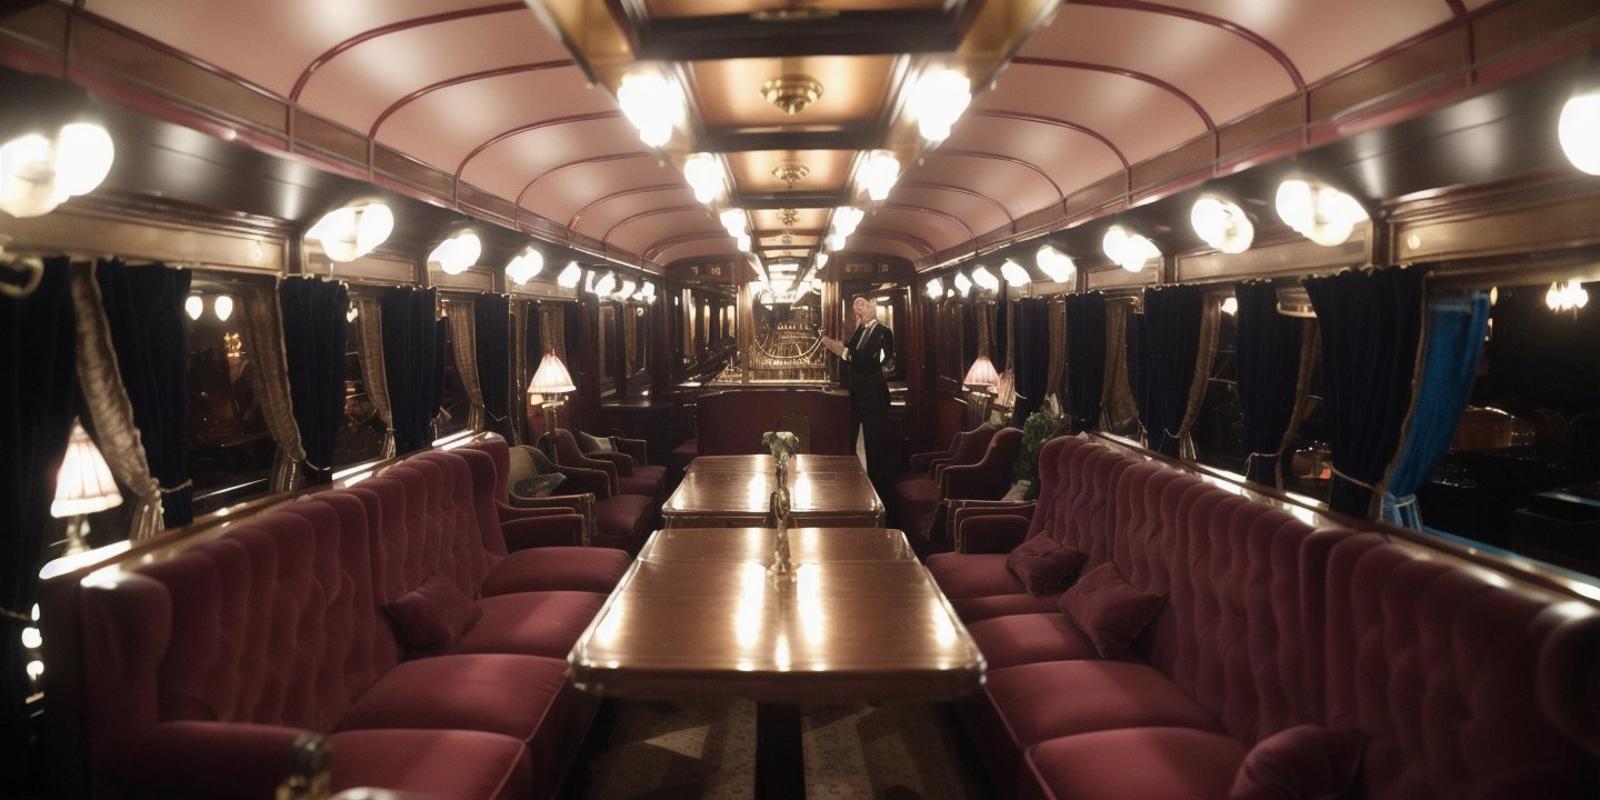 Orient express image by ainow